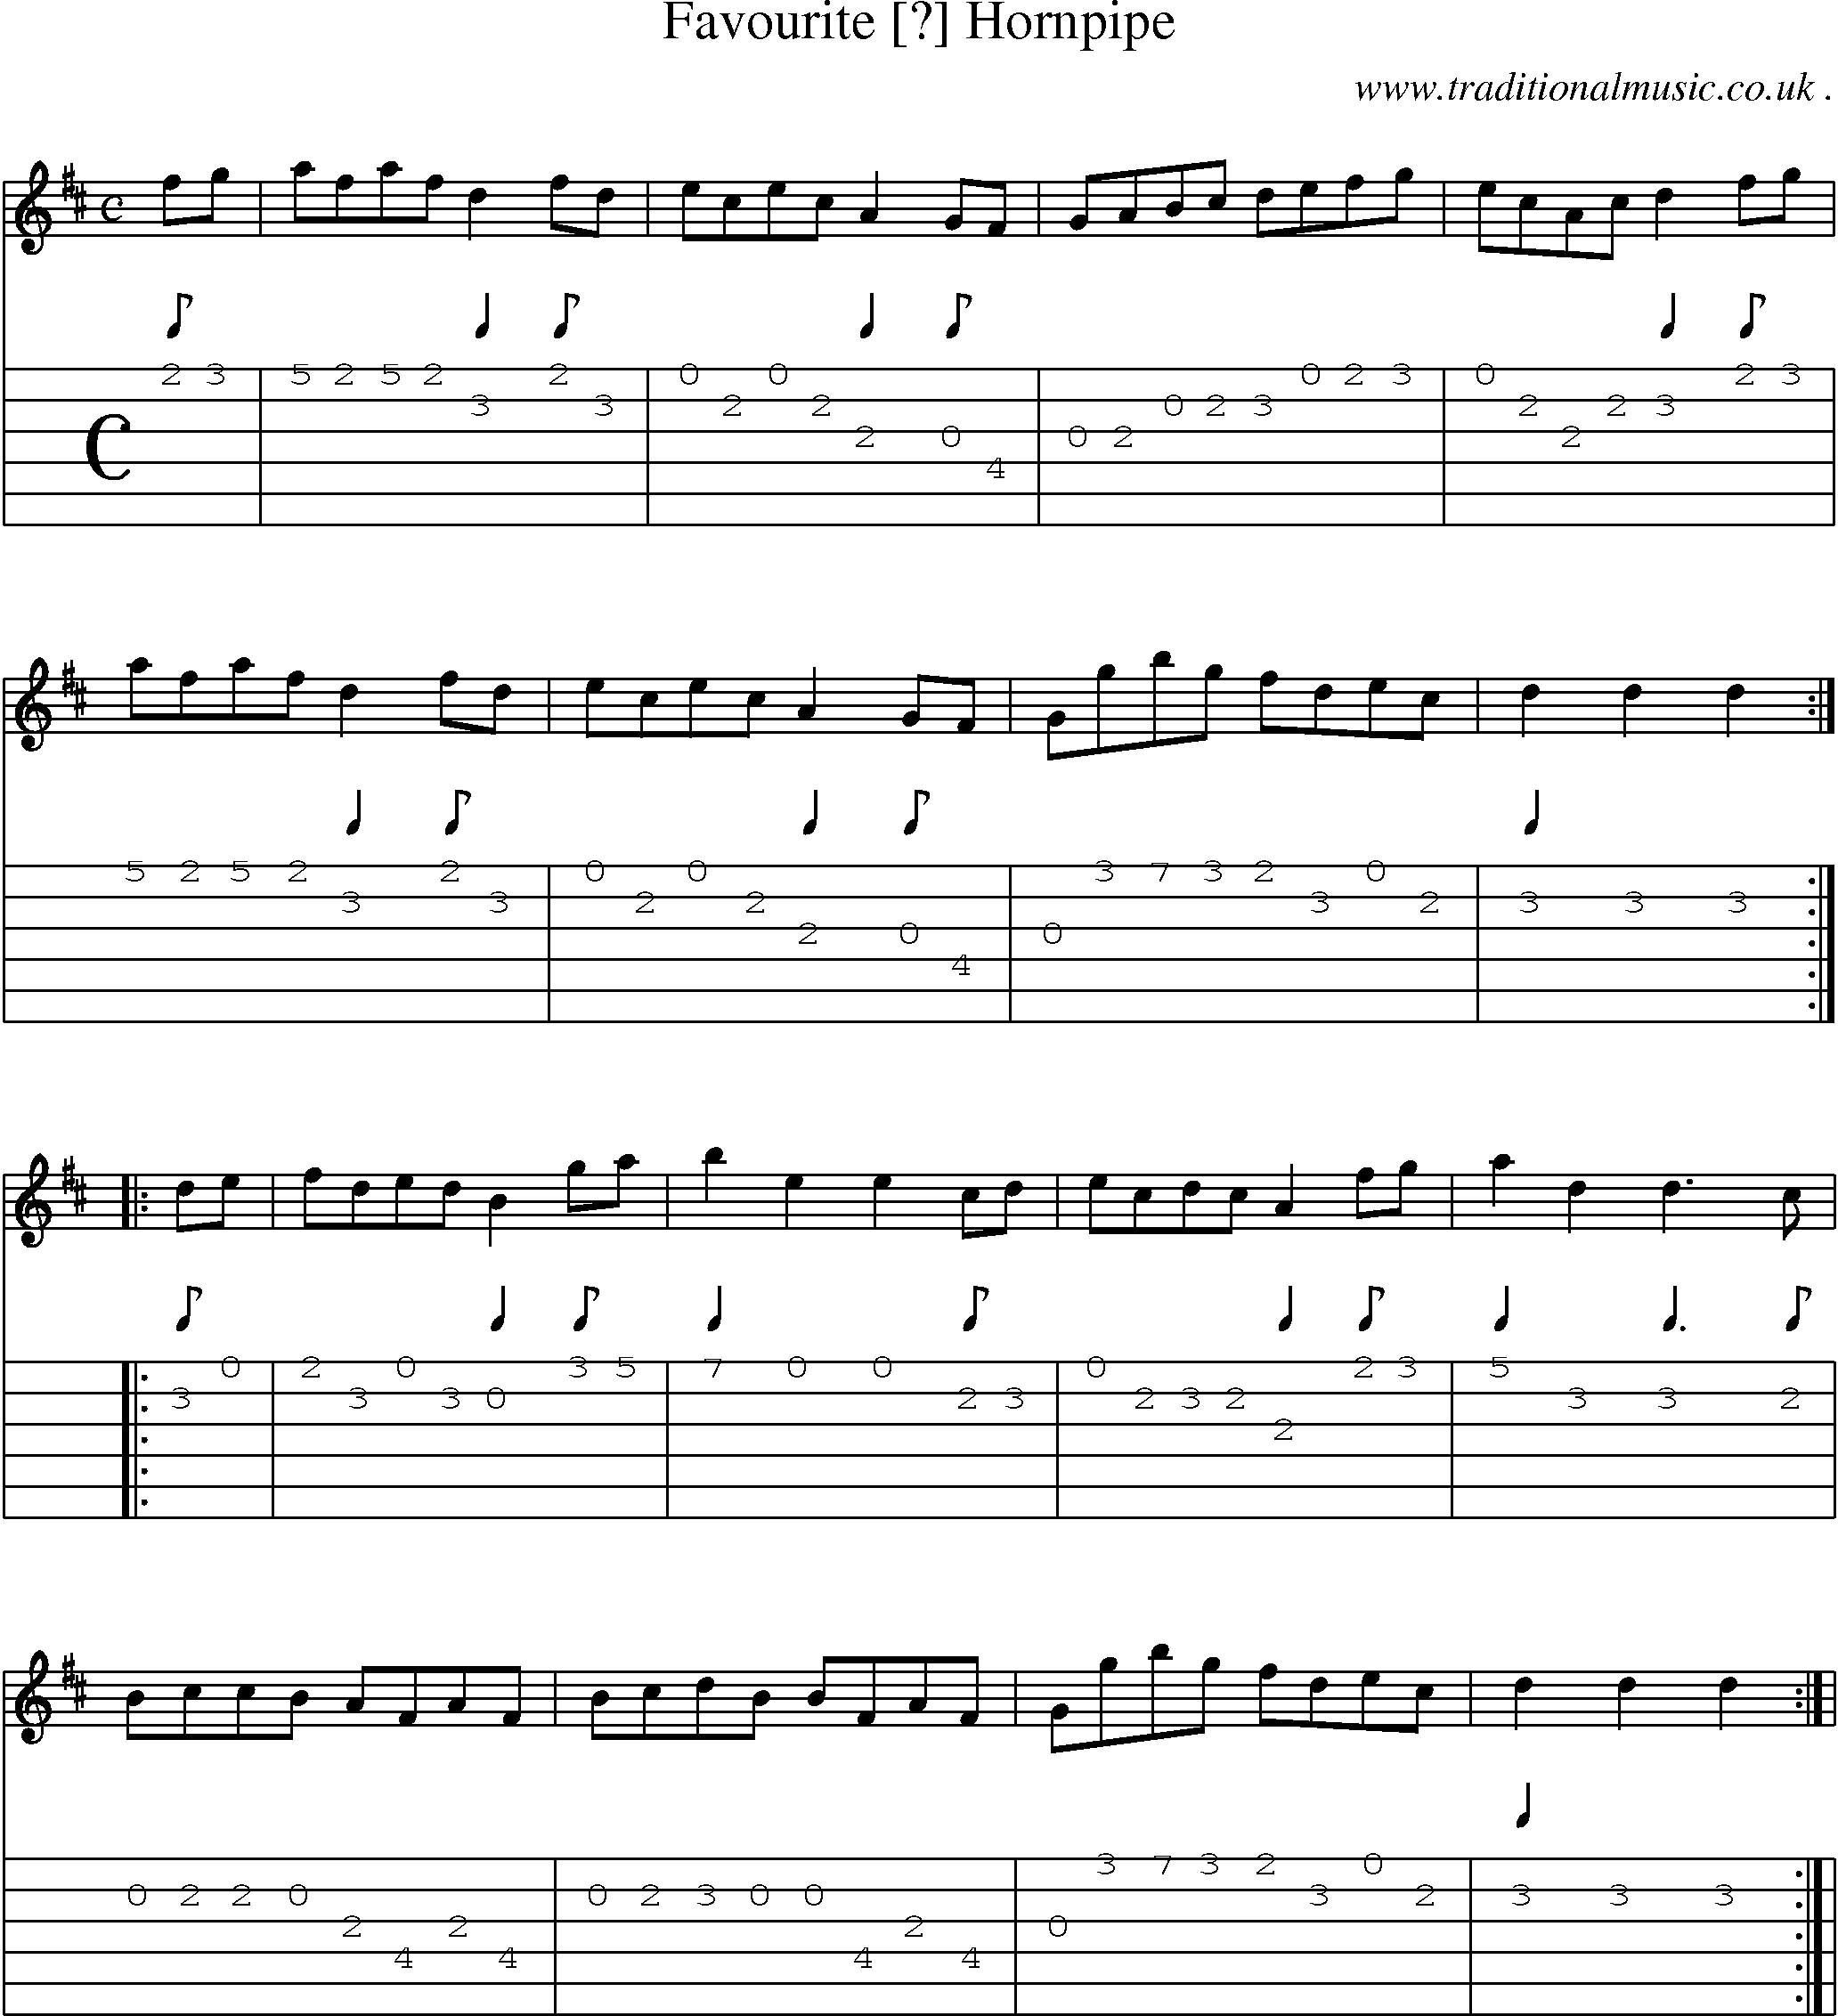 Sheet-Music and Guitar Tabs for Favourite  Hornpipe